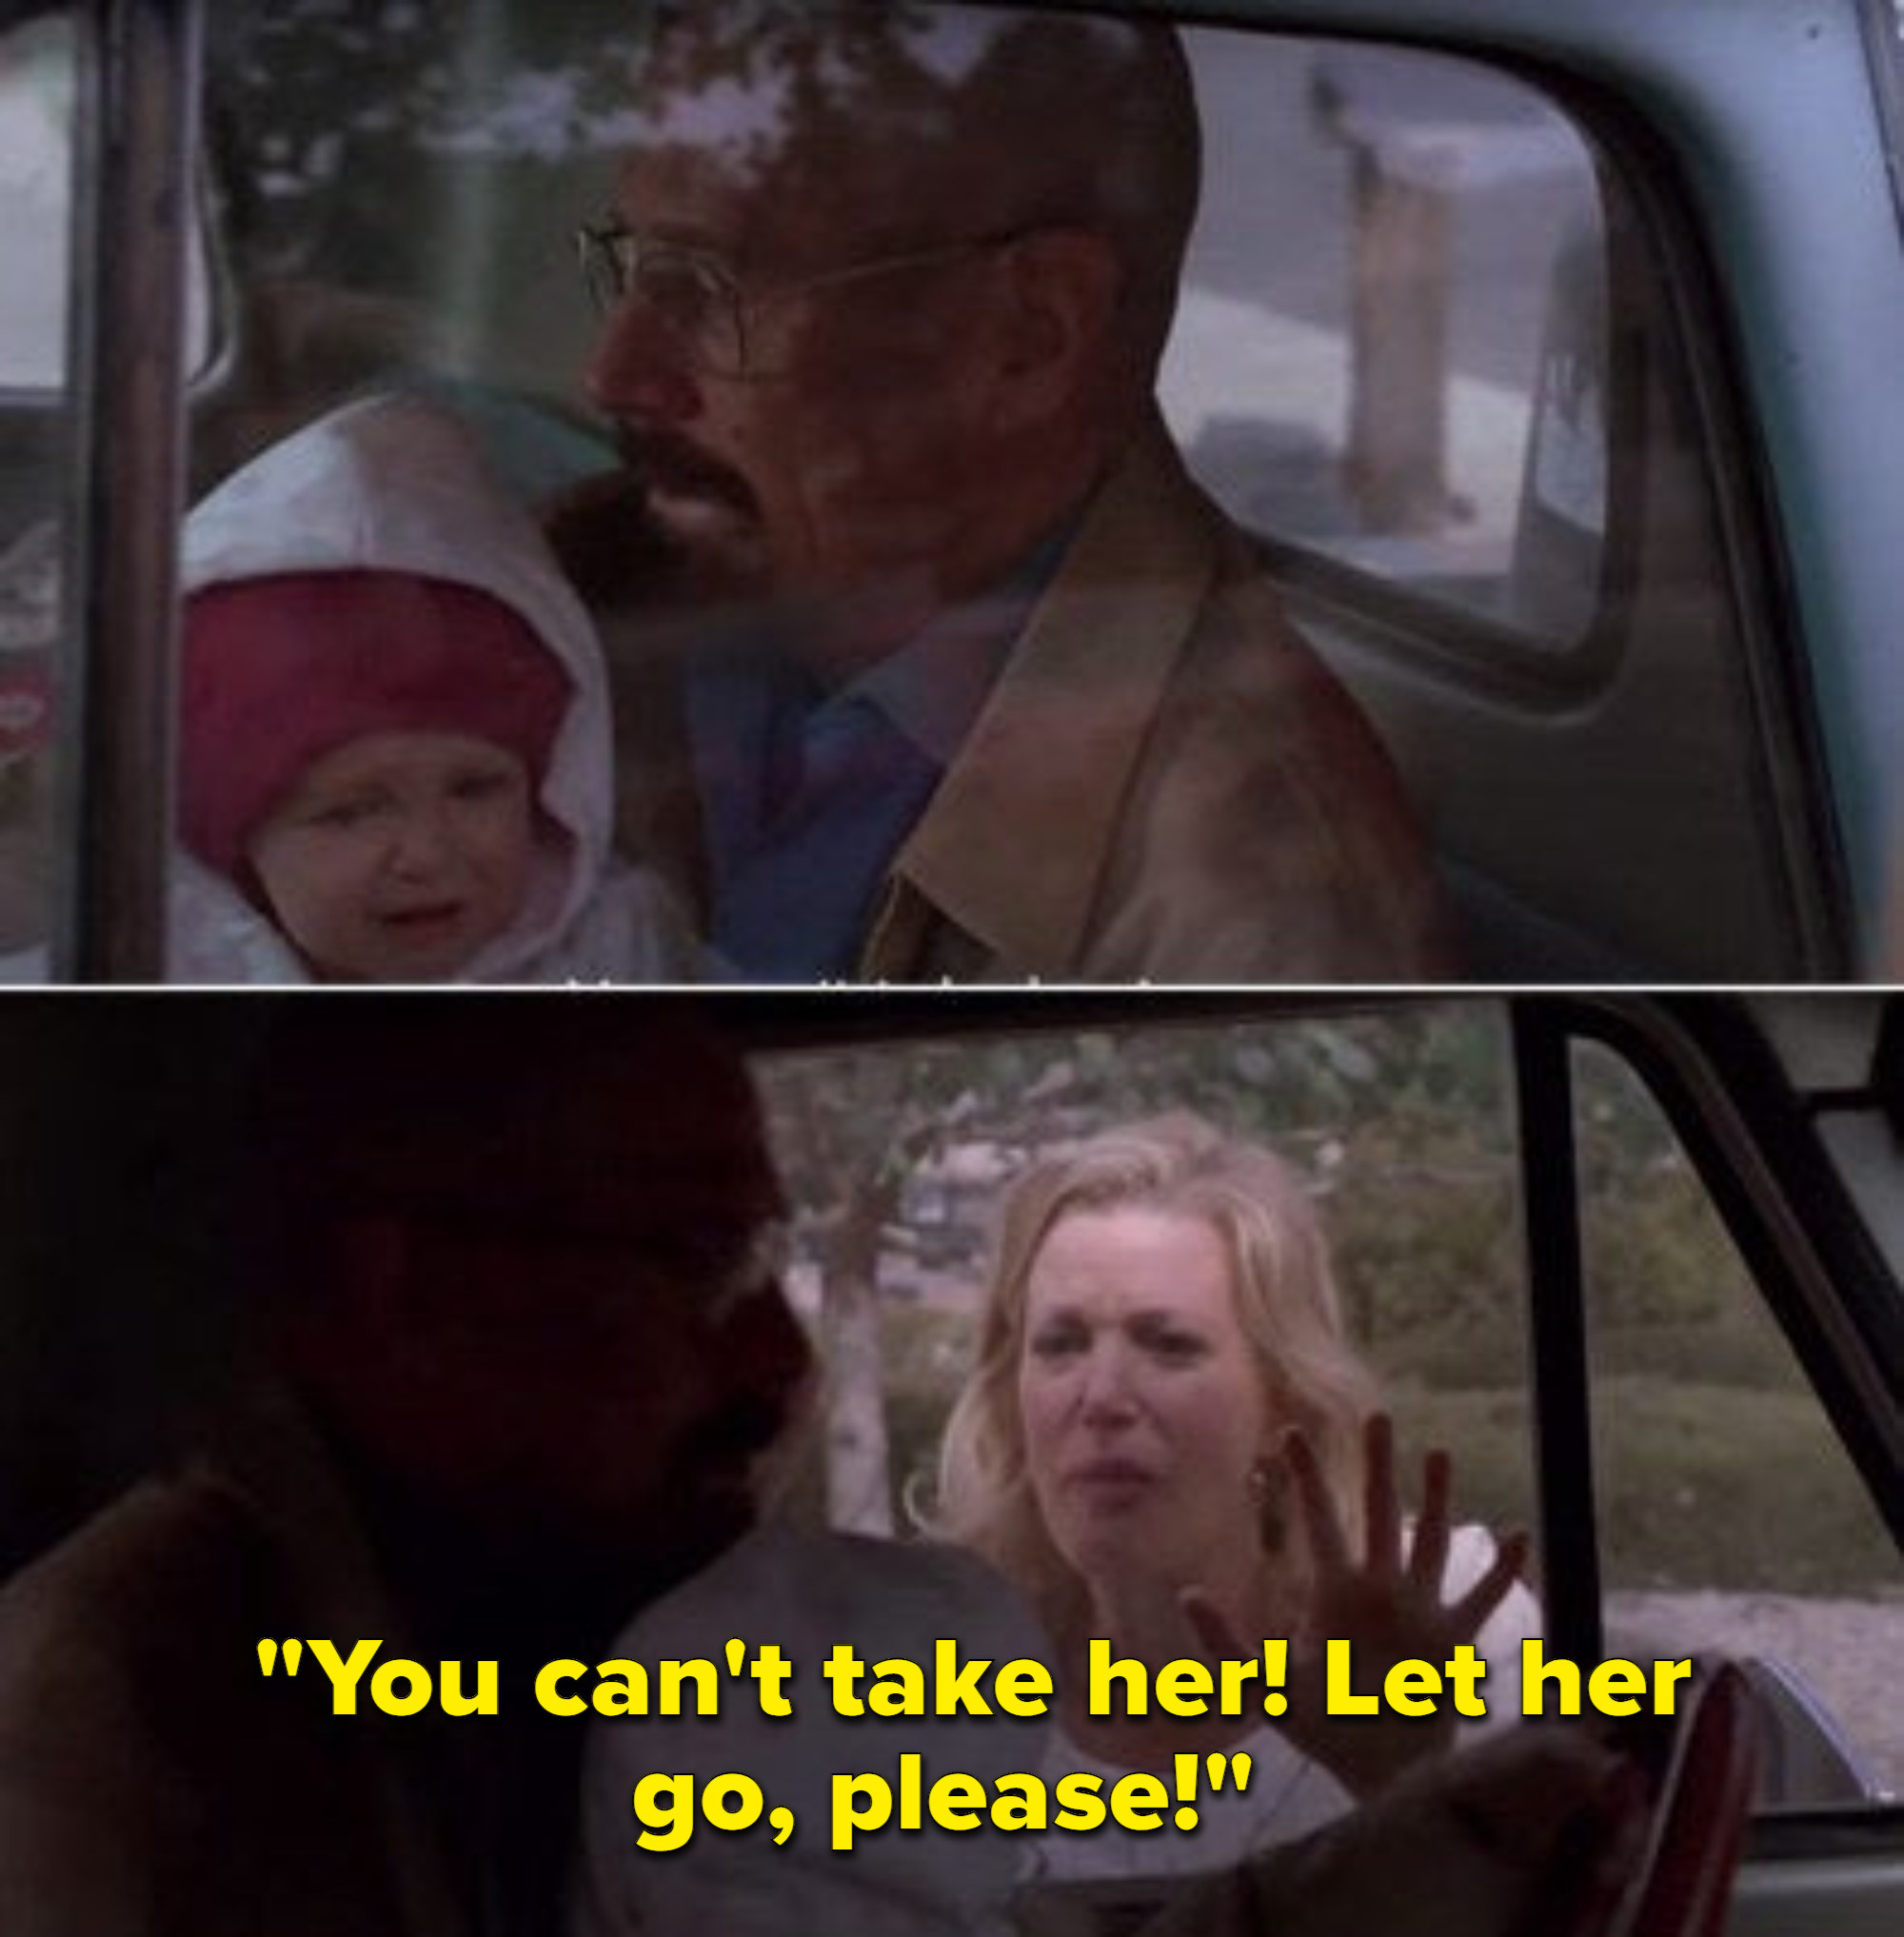 Walter about to drive off with his baby sitting on his lap while Skyler is outside banging on the window begging him not to take the baby